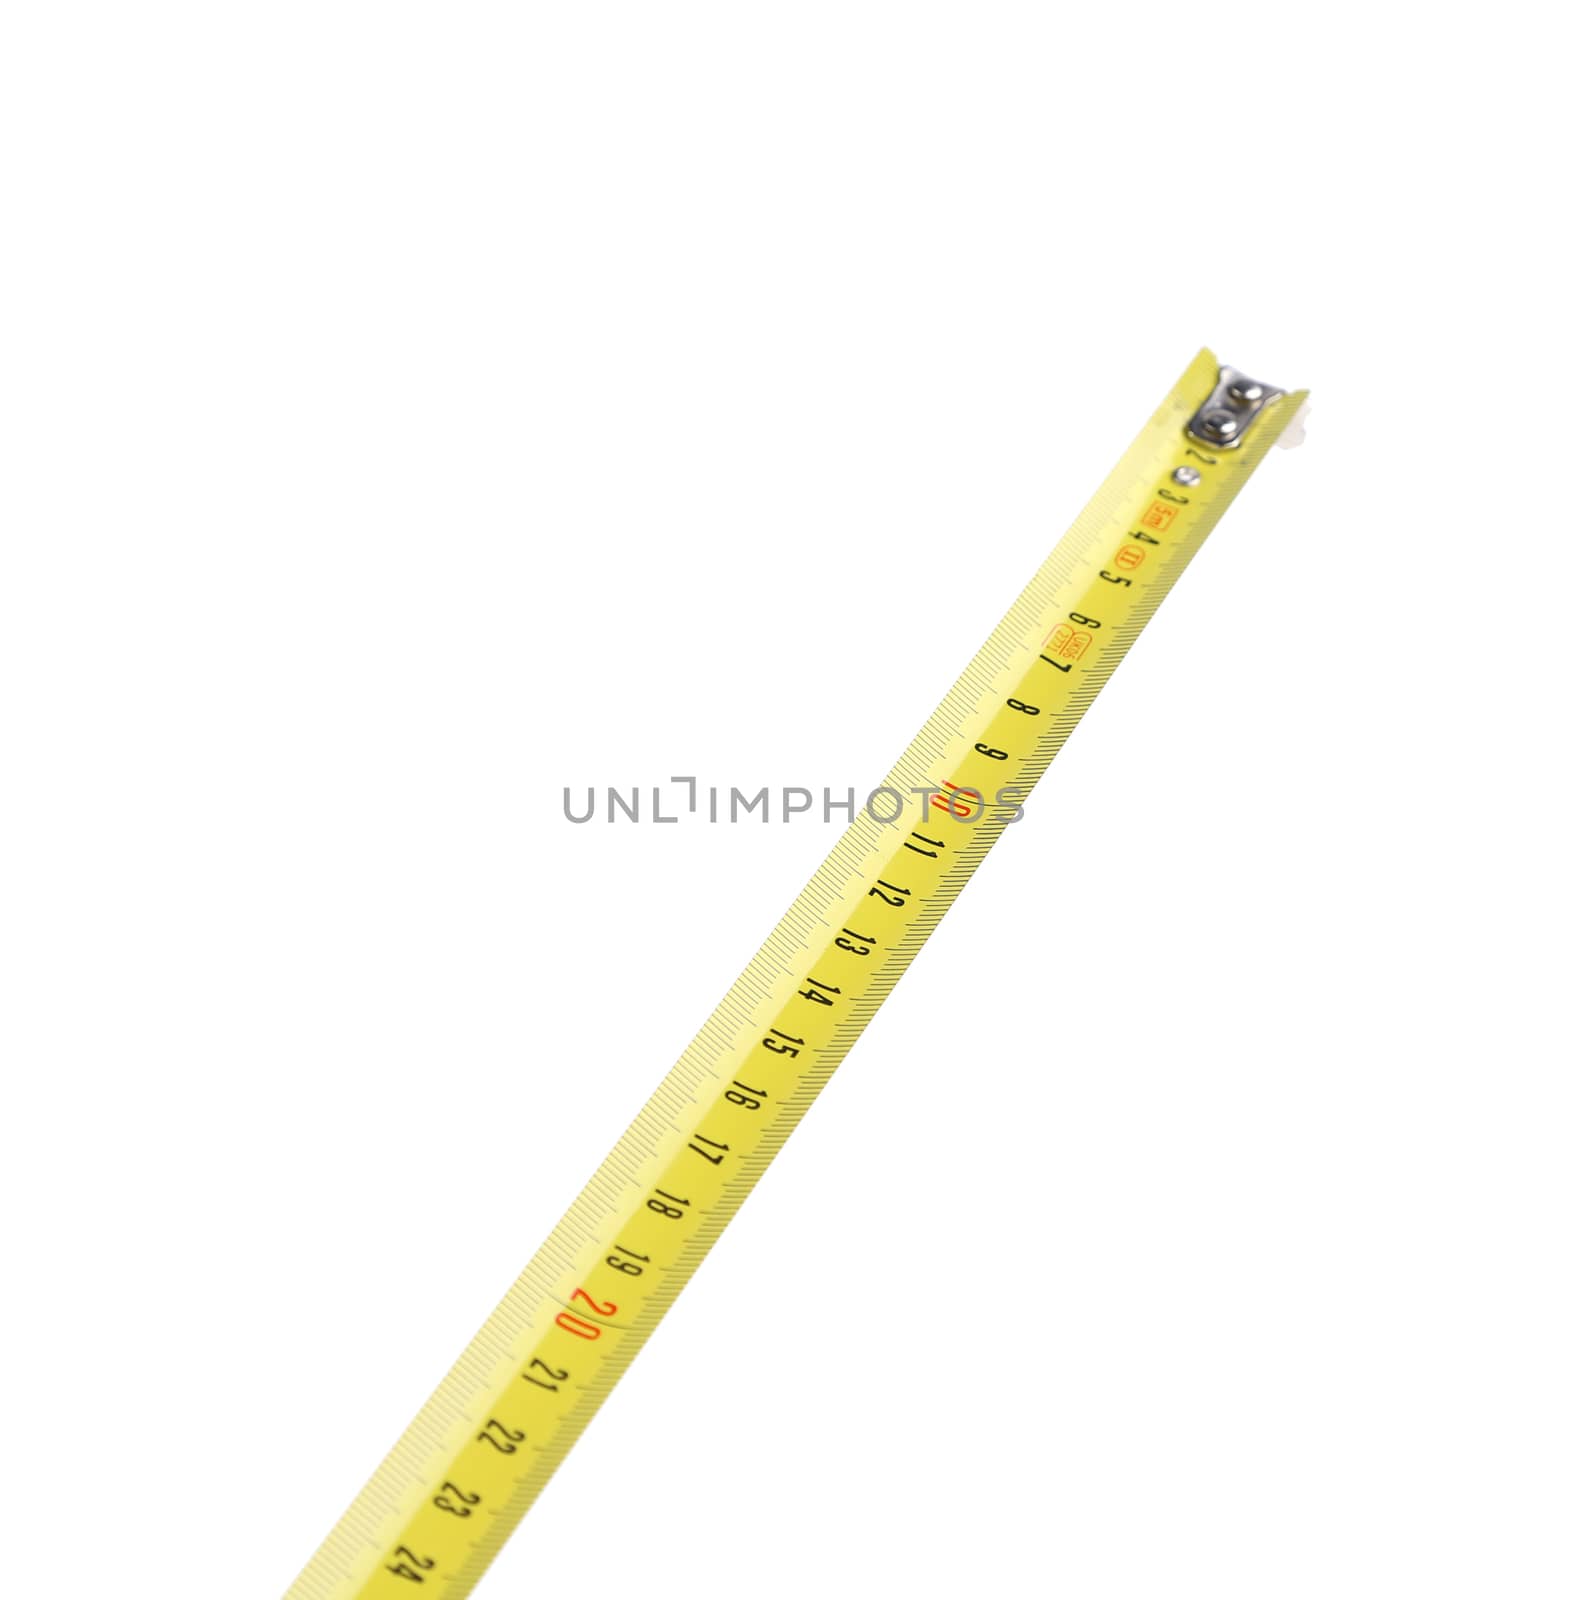 Tape Measure by diagonal. by indigolotos